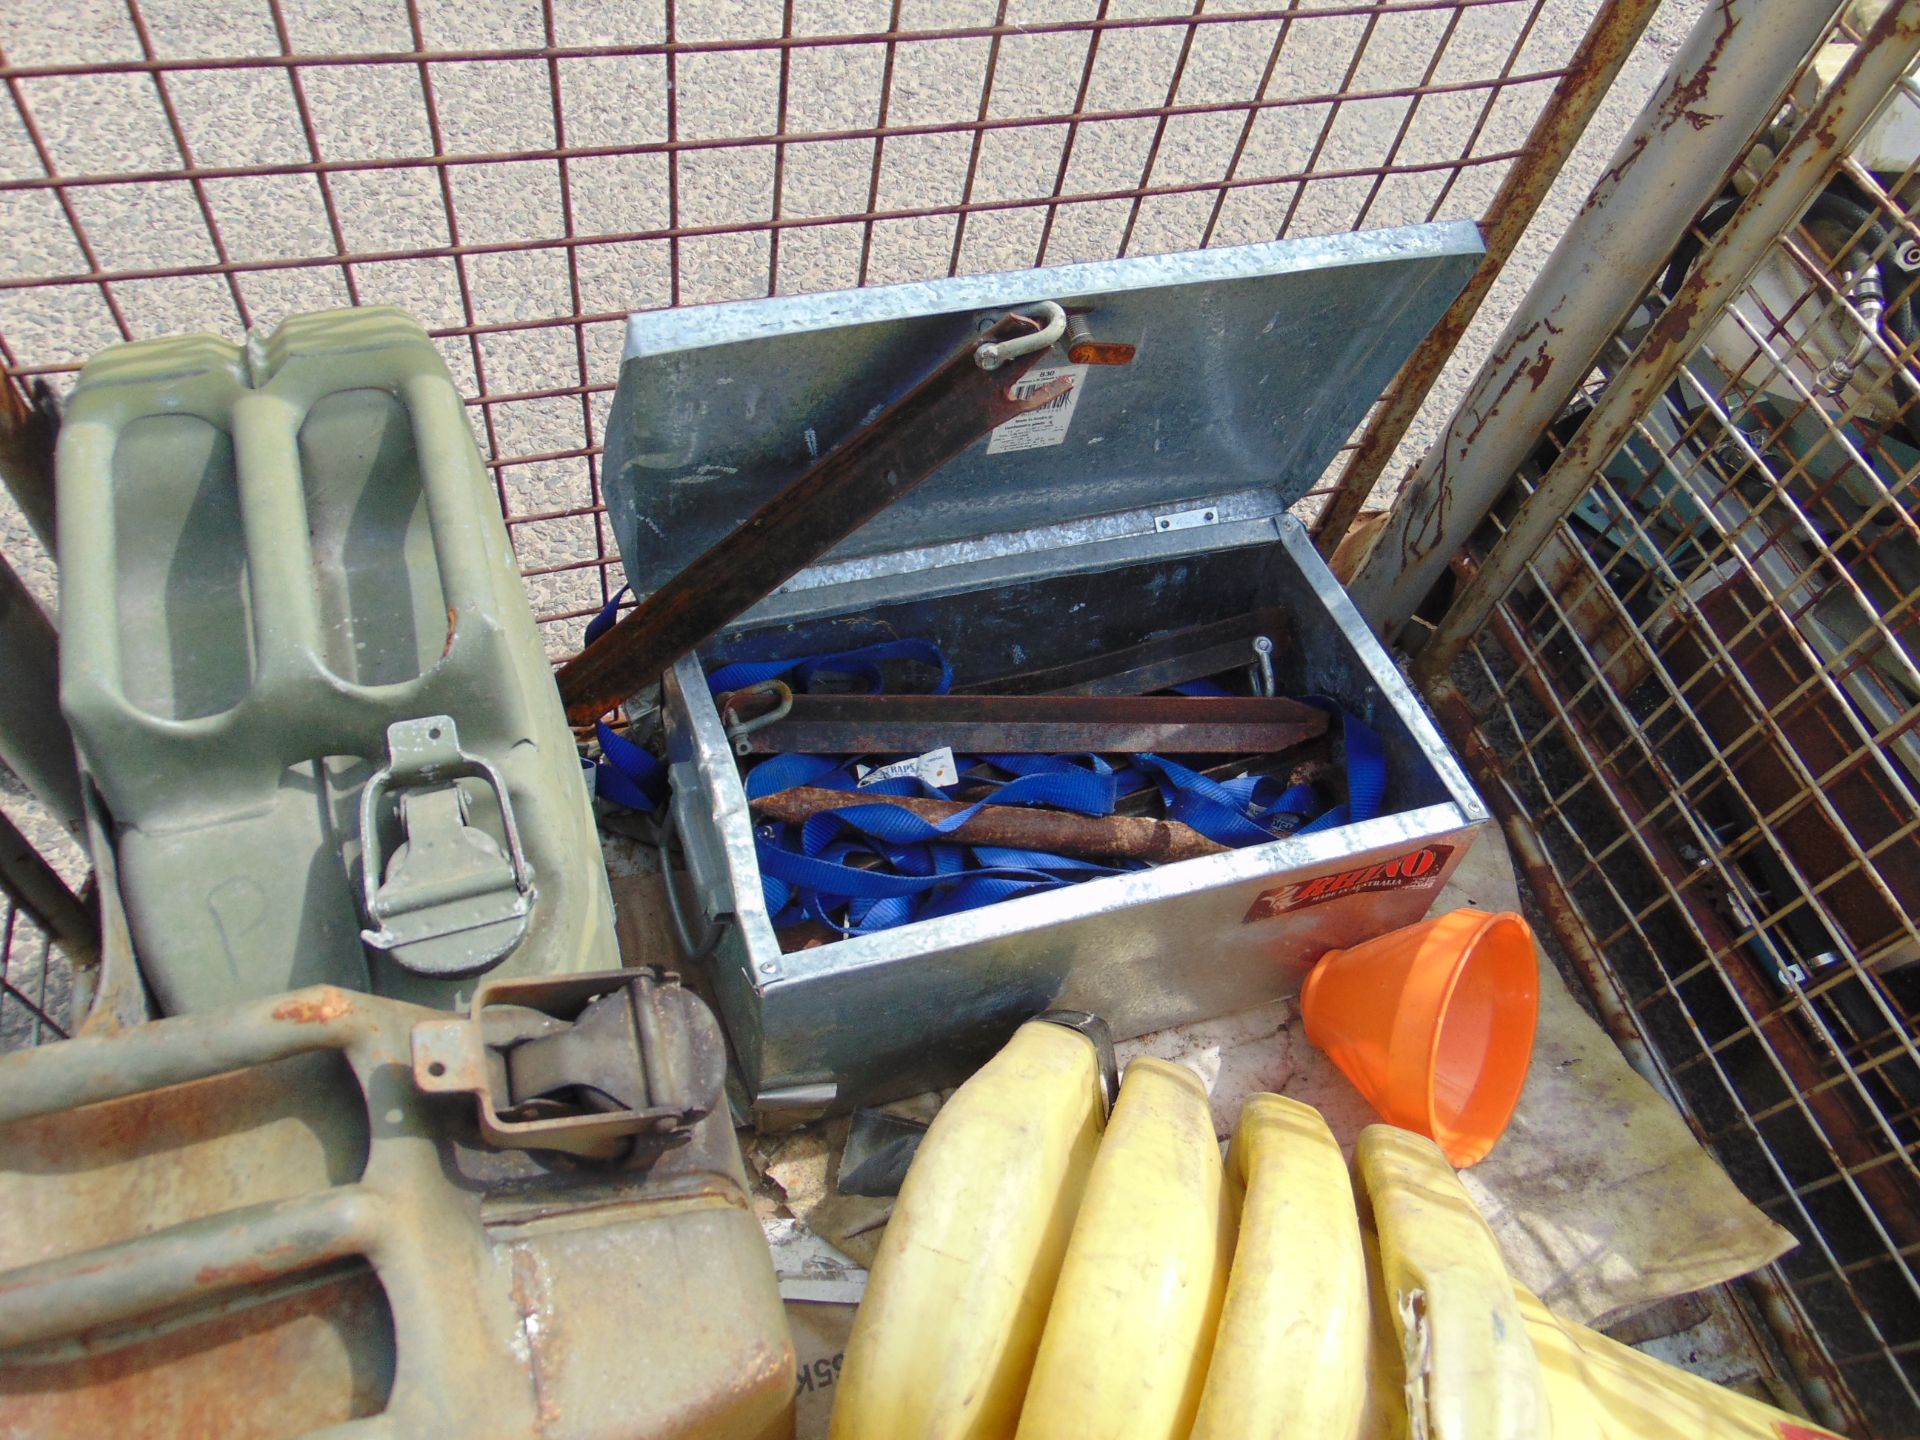 TRAFFIC CONES, JERRY CANS, STRAPS, SPILL KITS ETC - Image 6 of 6